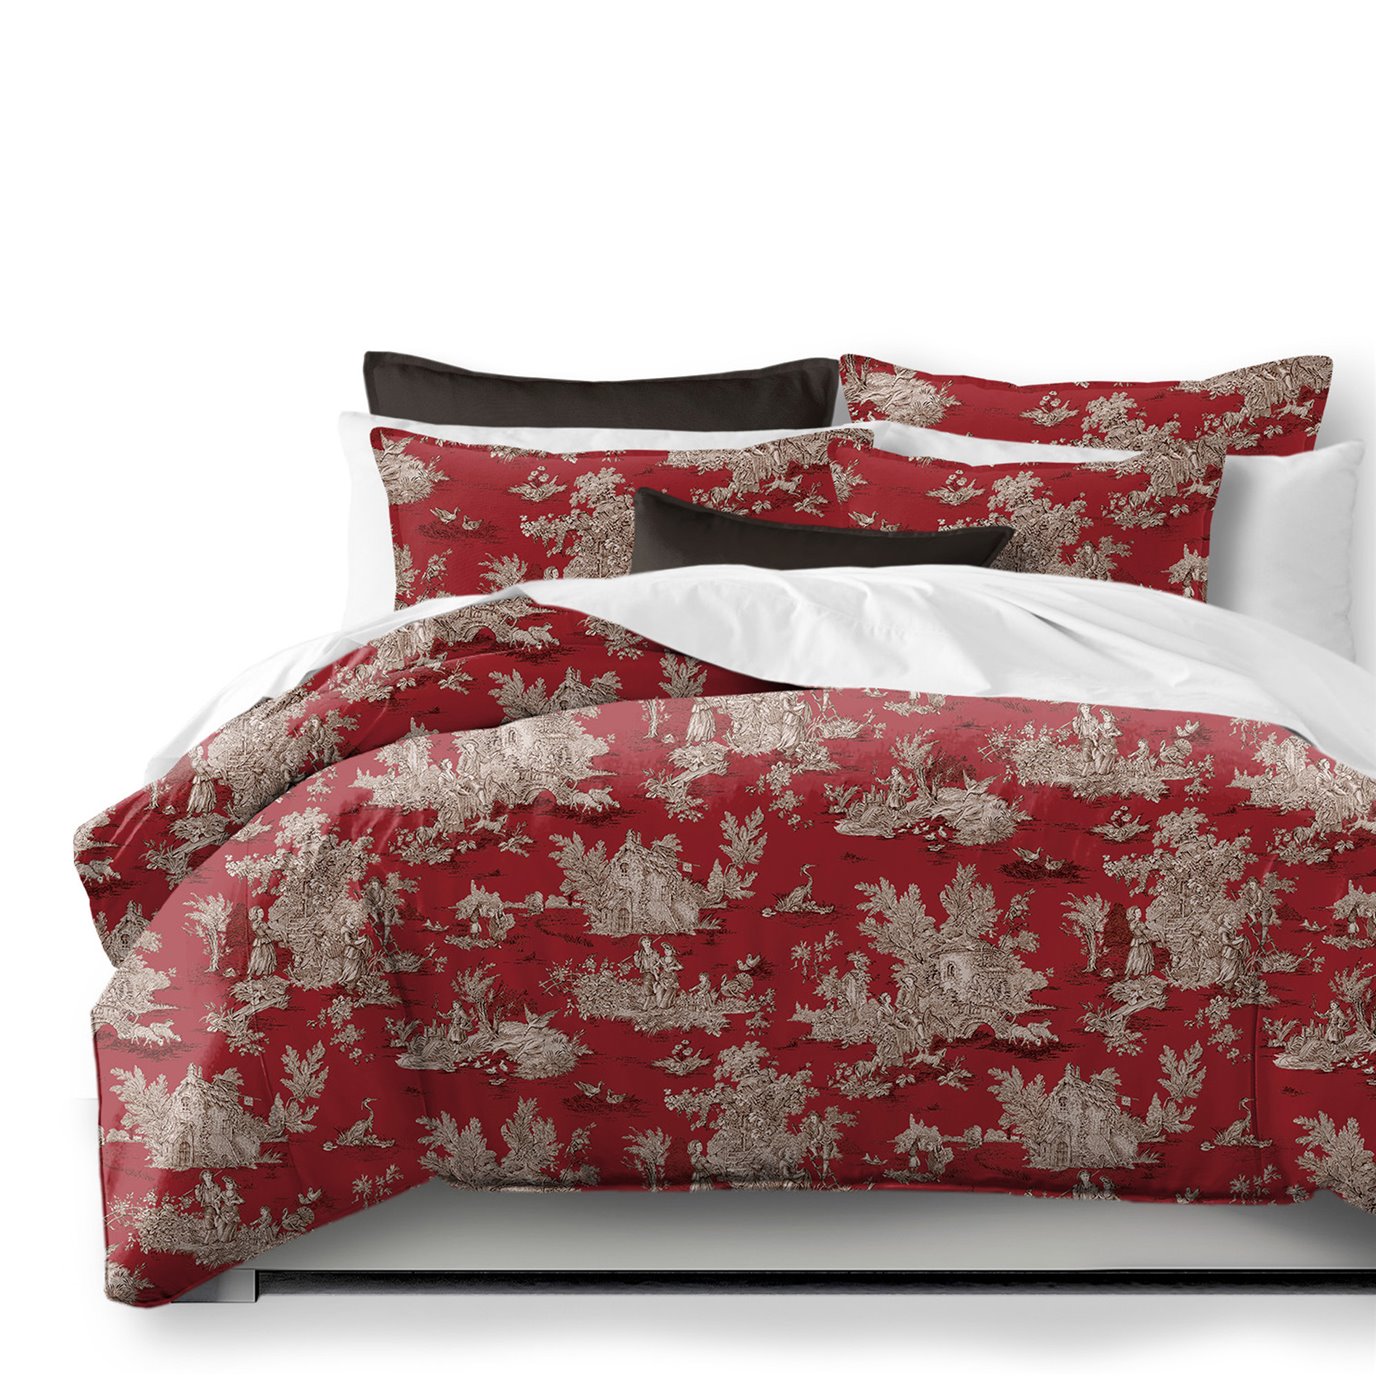 Chateau Red/Black Coverlet and Pillow Sham(s) Set - Size Queen